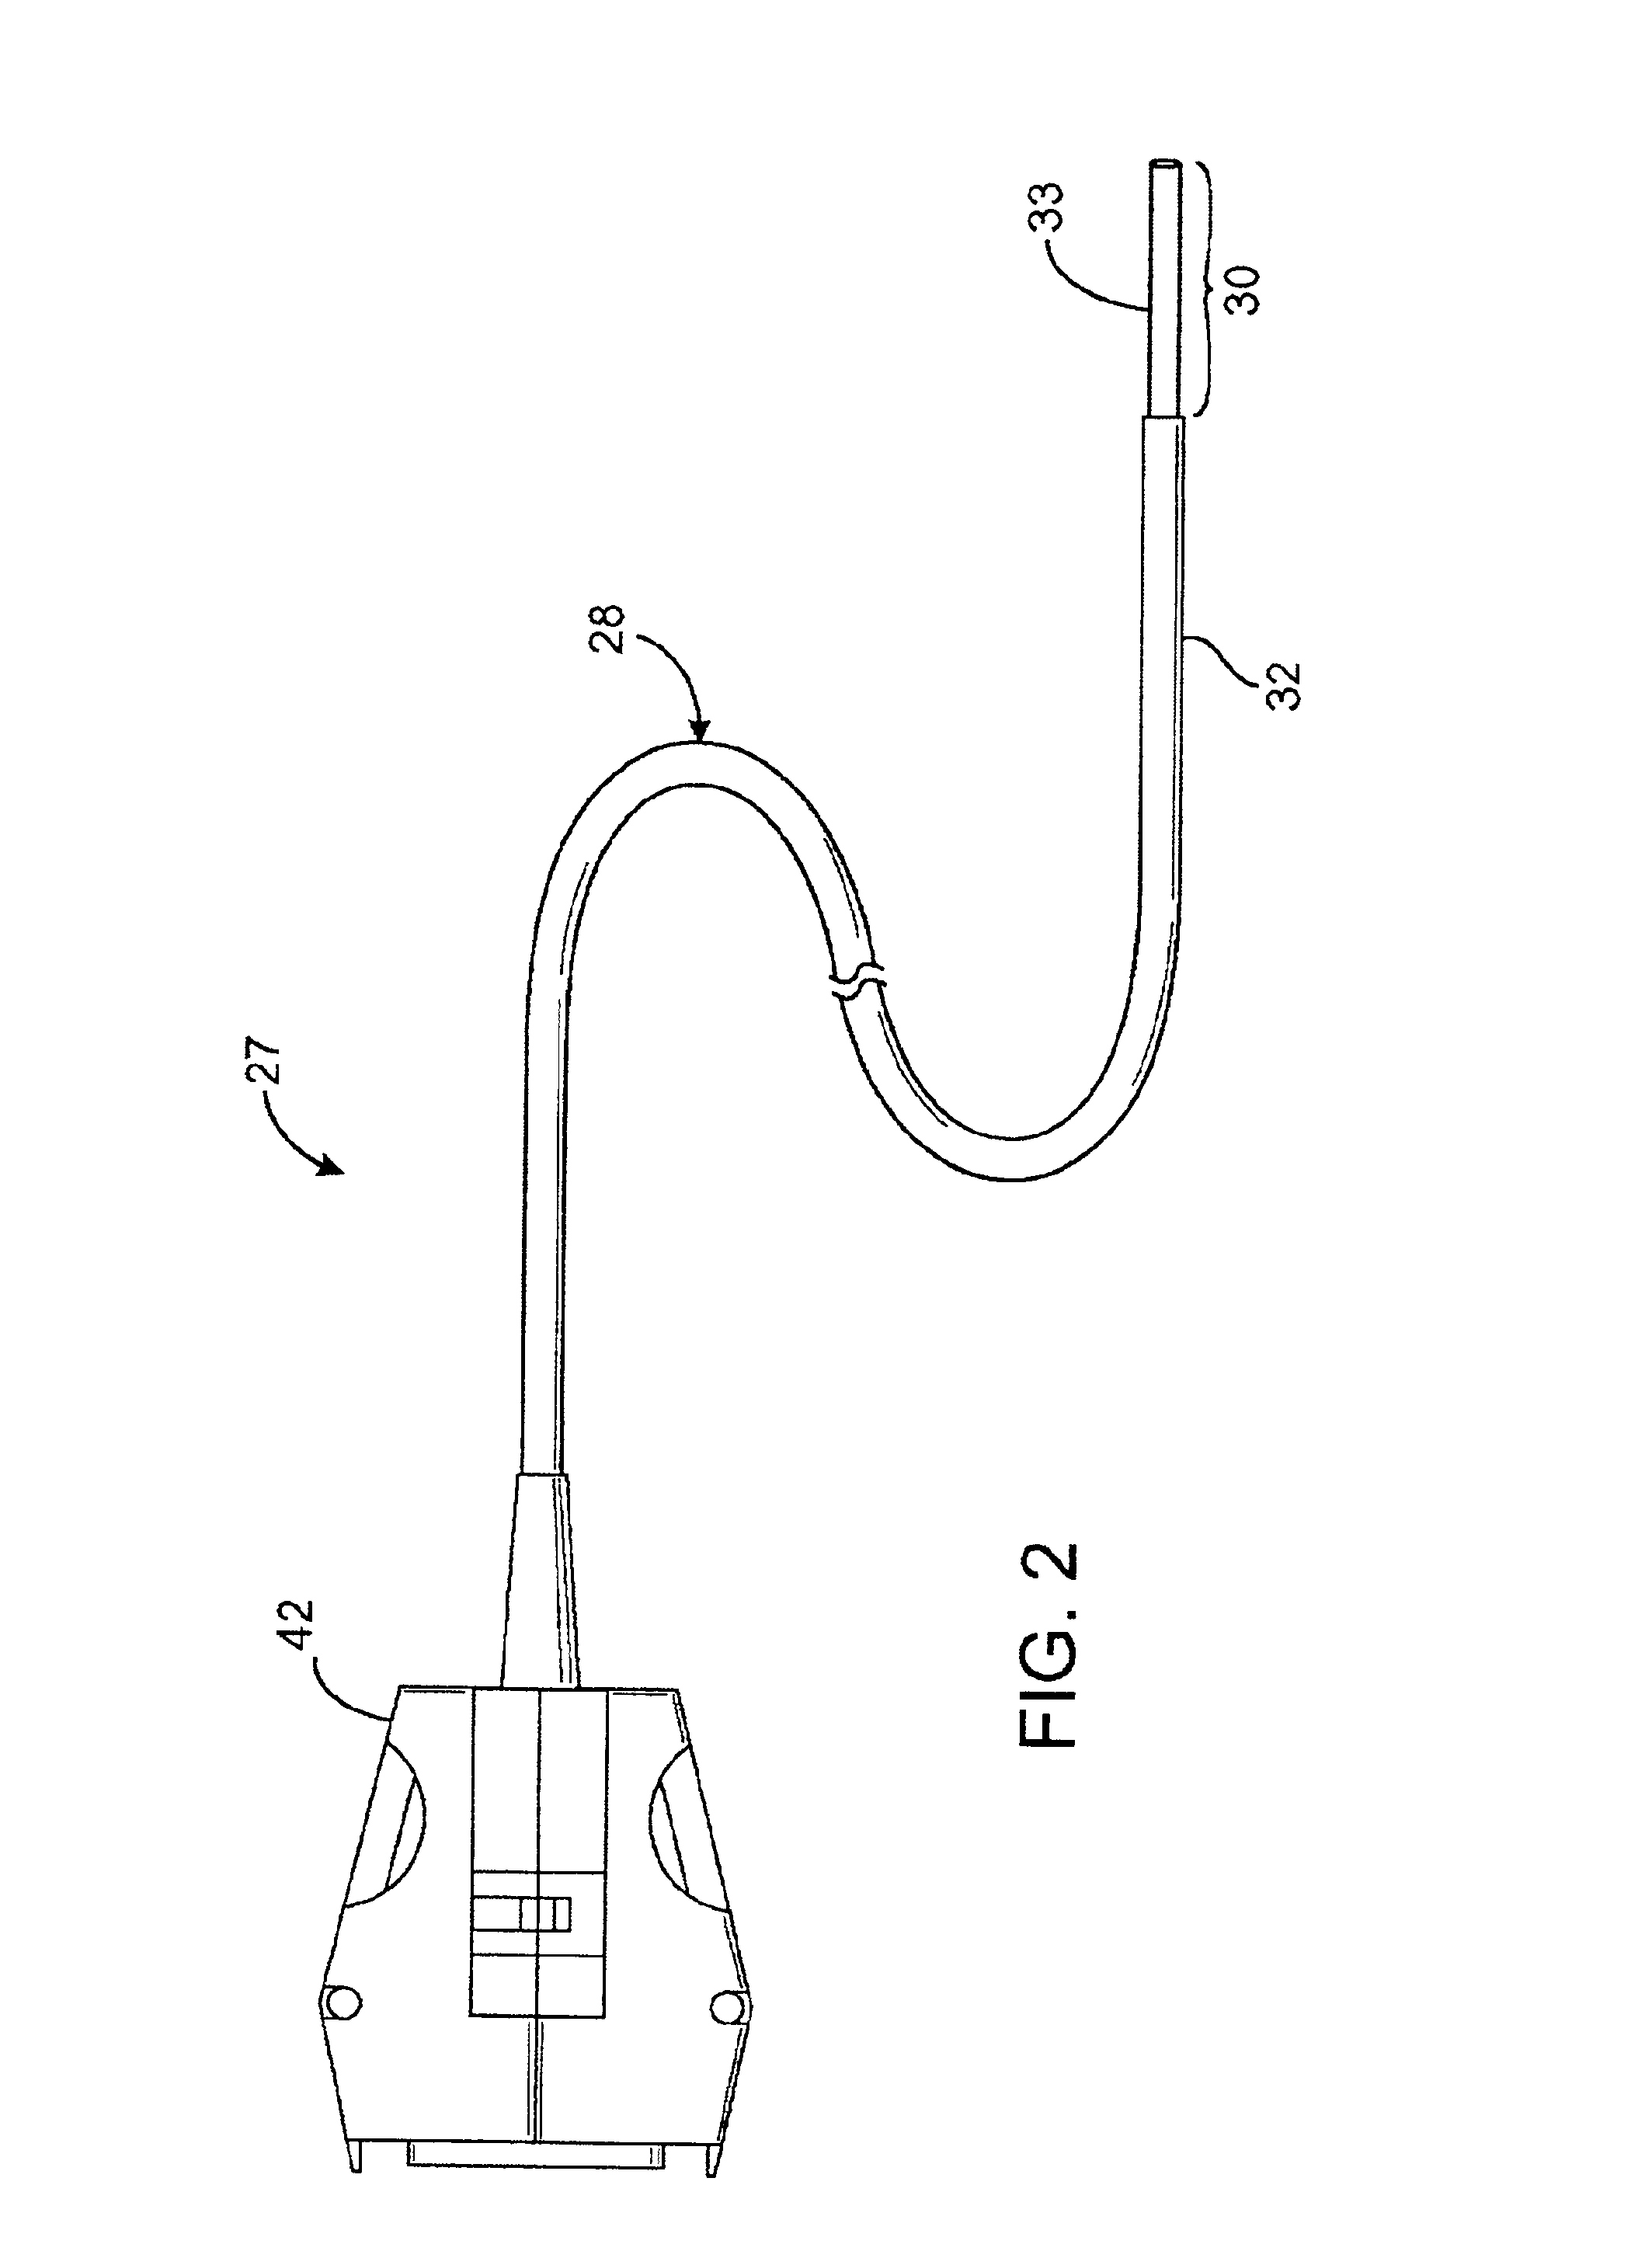 Microwave ablation instrument with insertion probe